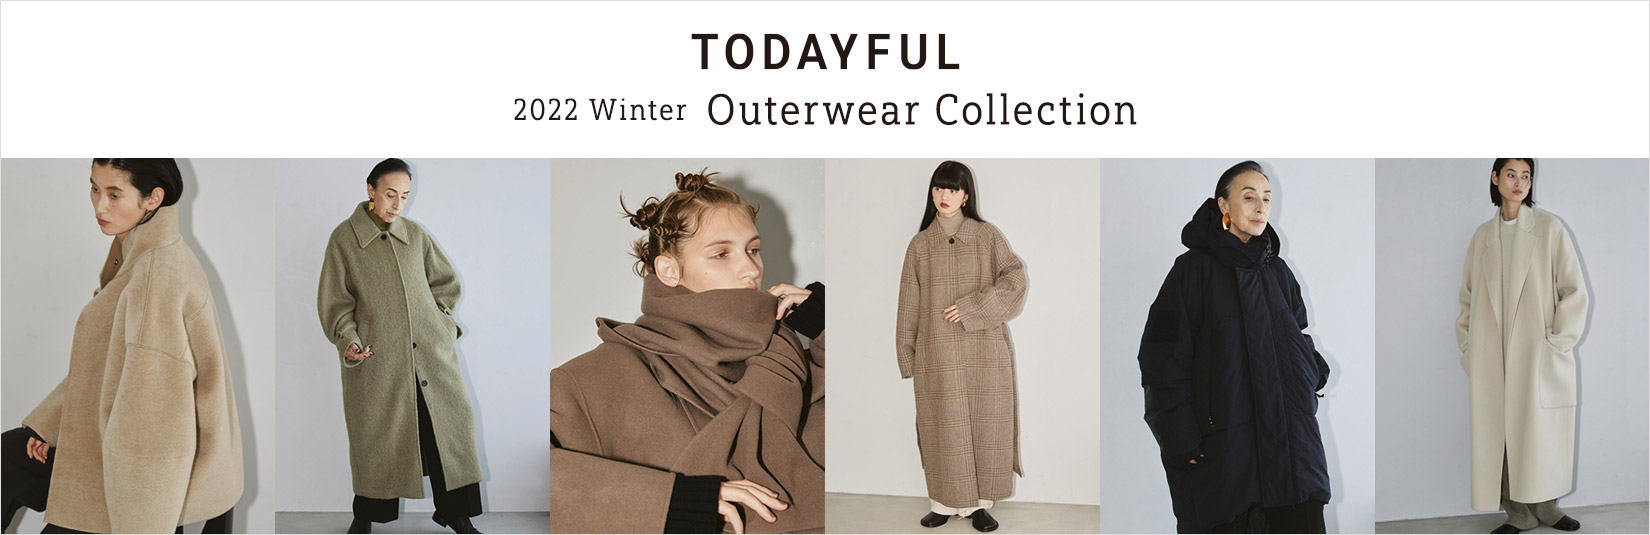 TODAYFUL -2022Winter Outerwear Collection-